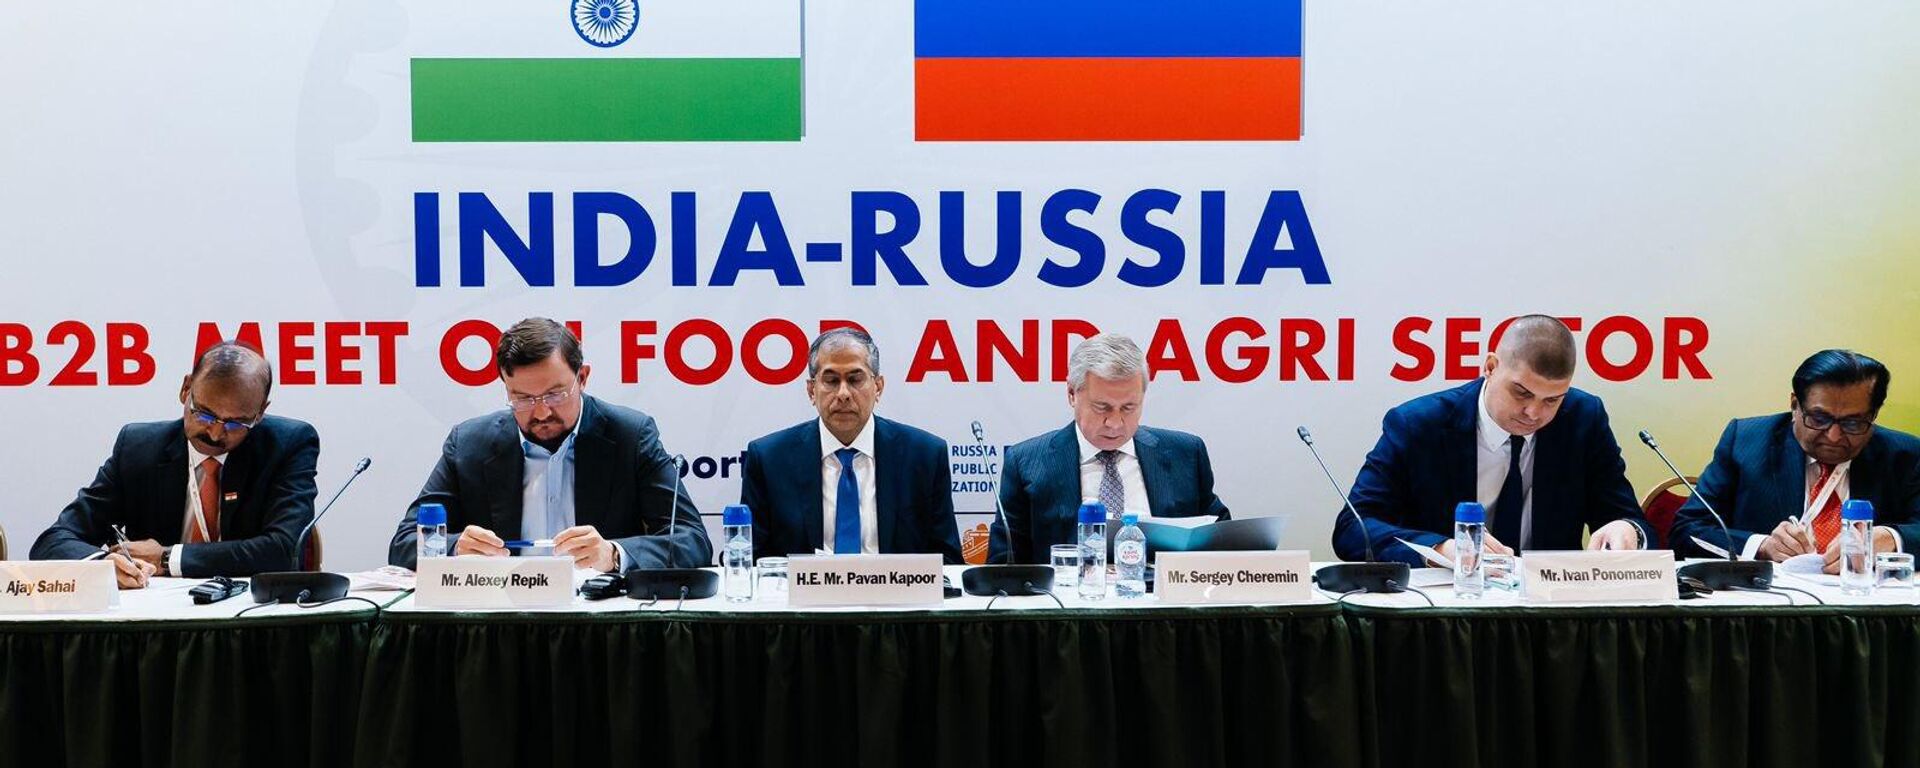 The India-Russia business meeting on Food & Agri sector in Moscow on 24 April 2023 - Sputnik India, 1920, 25.04.2023